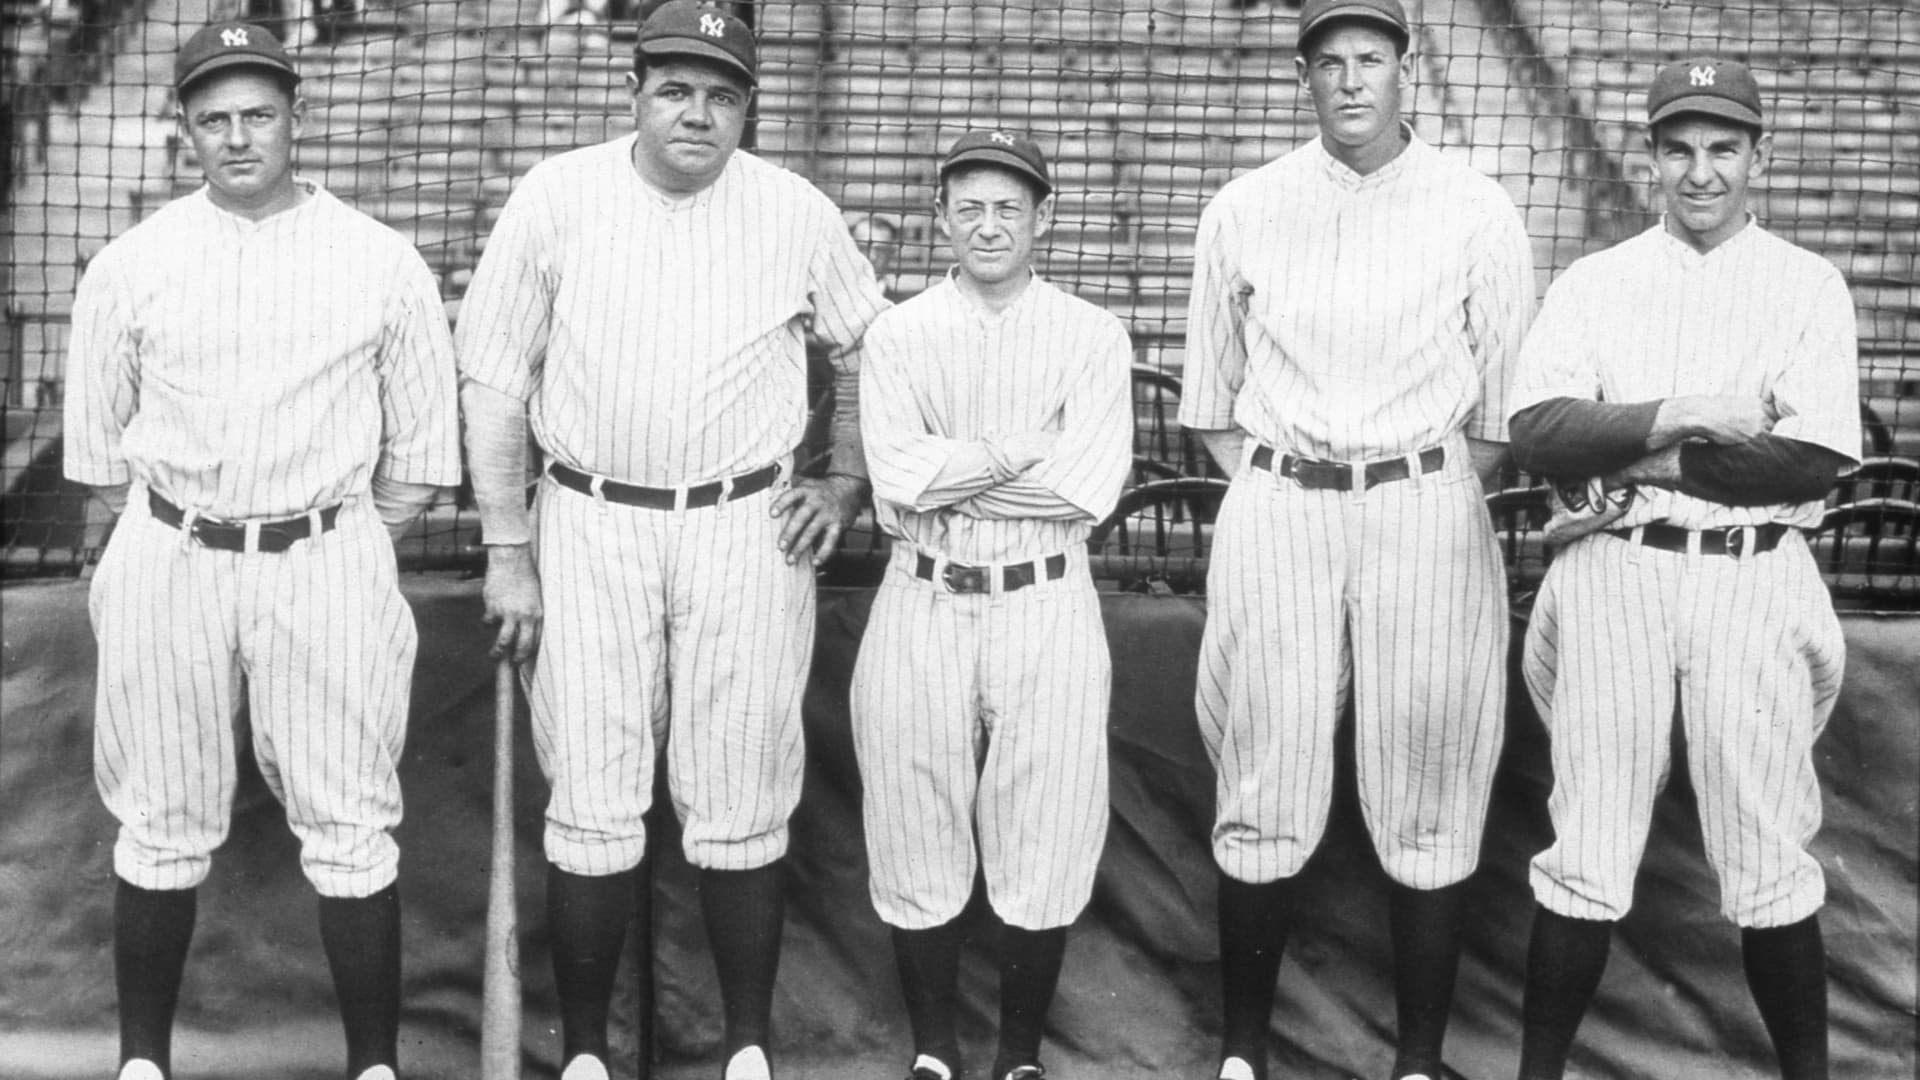 (L-R) Waite Hoyt, Babe Ruth, Miller Huggins, Bob Meusel and Bob Shawkey pose for a photo at Yankee Stadium in New York City in 1927.